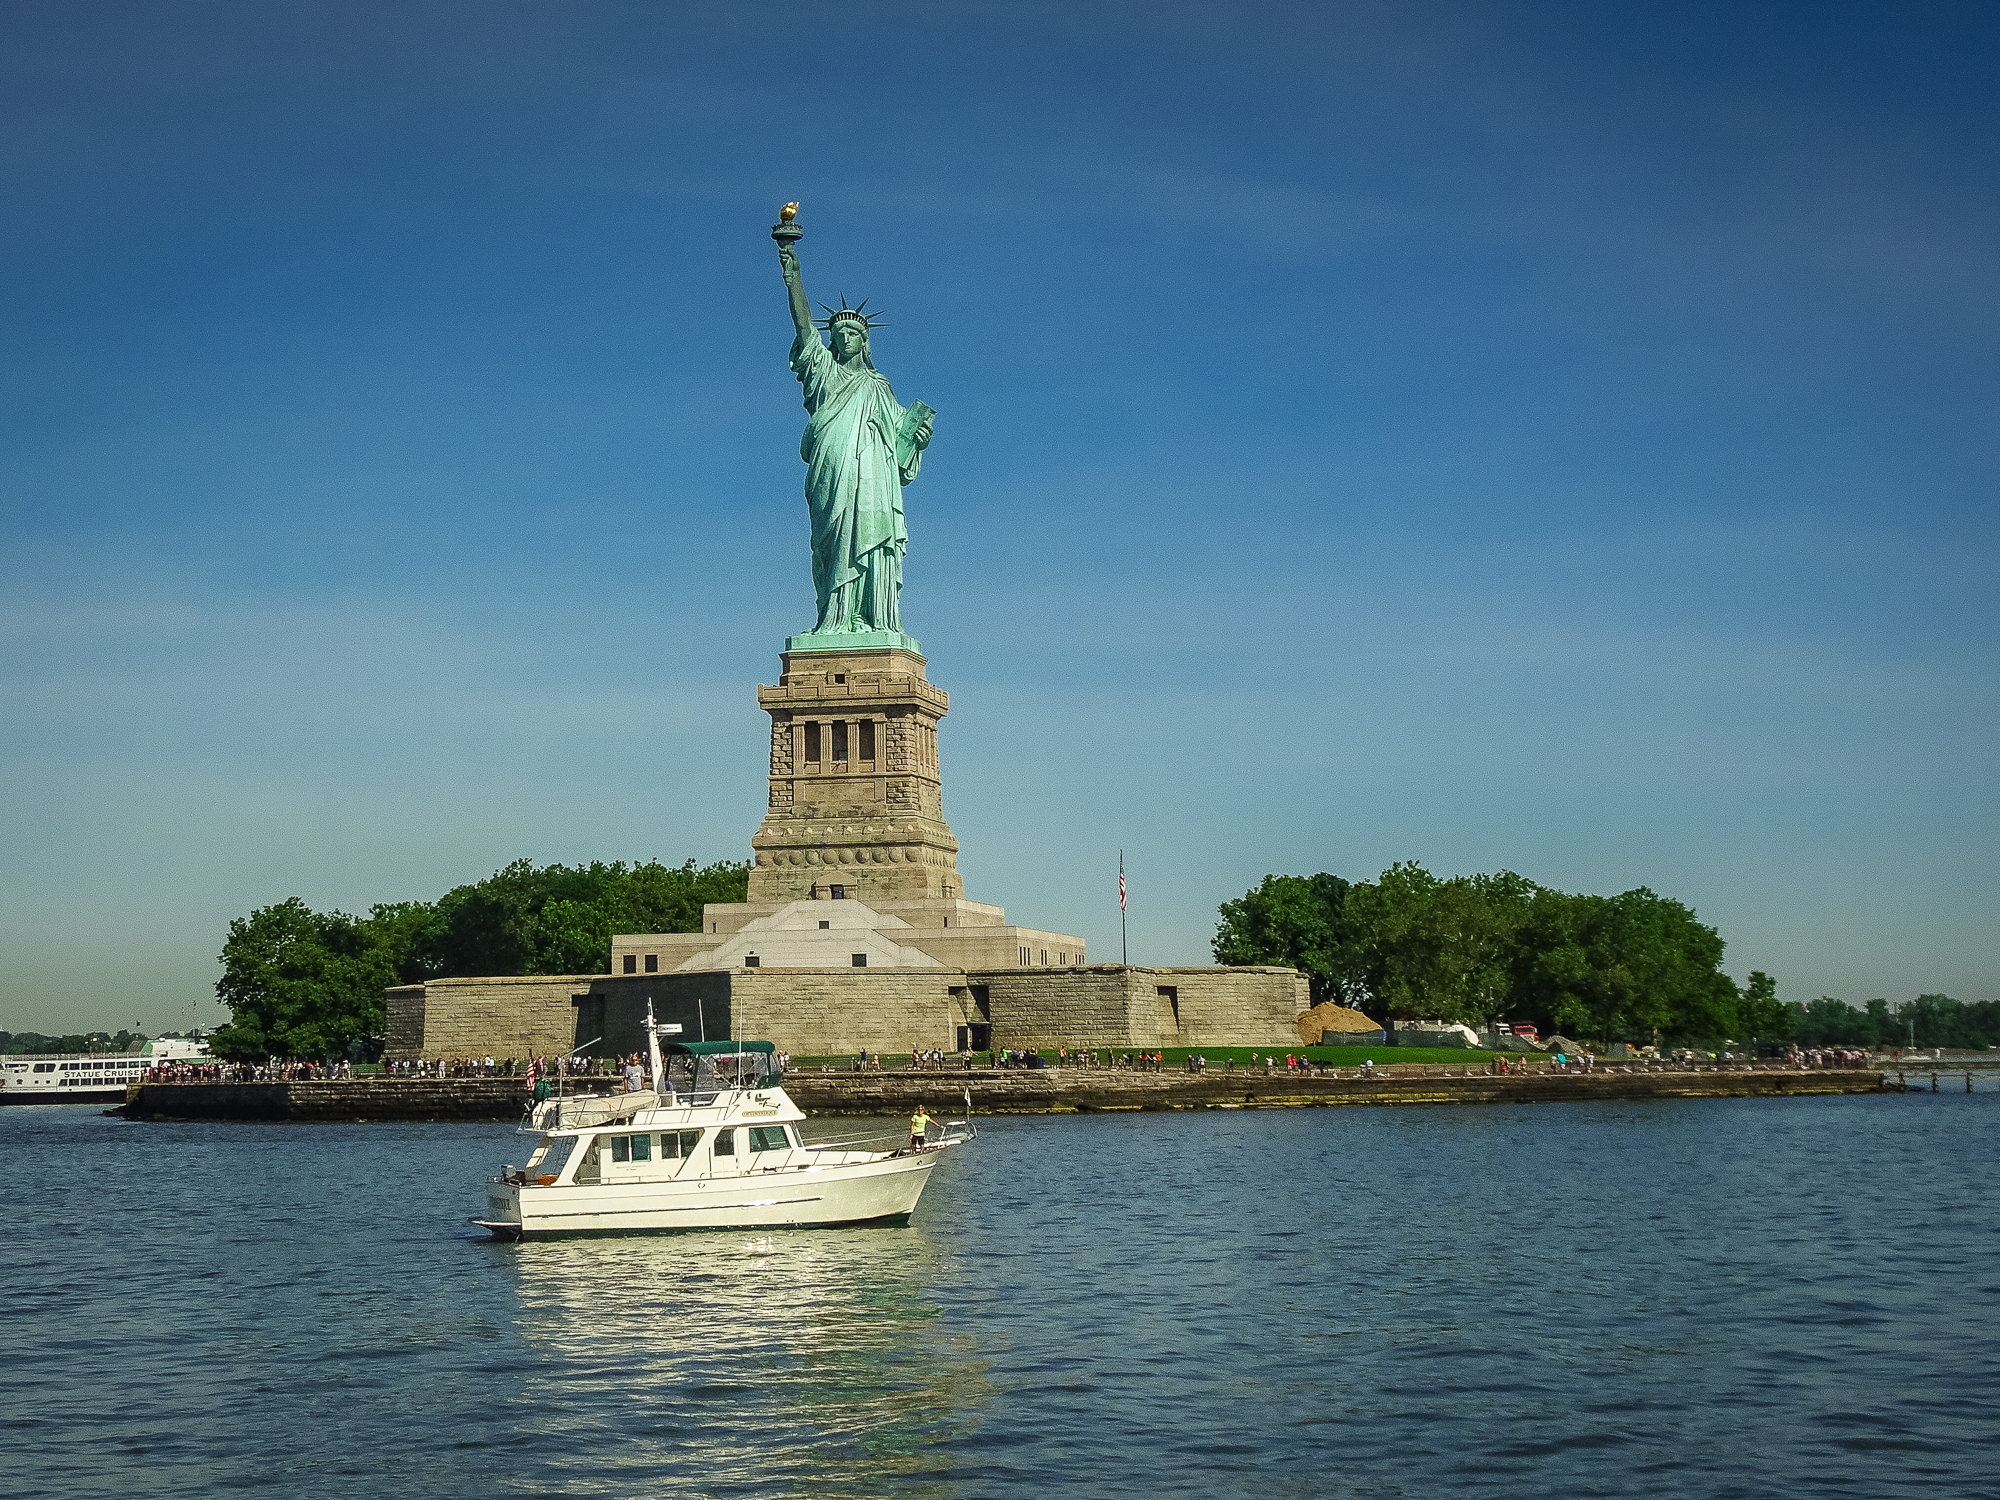 Can You Swim In The Hudson River Near The Statue Of Liberty Cruising The Big Apple And The Hudson Rivercommuter Cruiser Commuter Cruiser